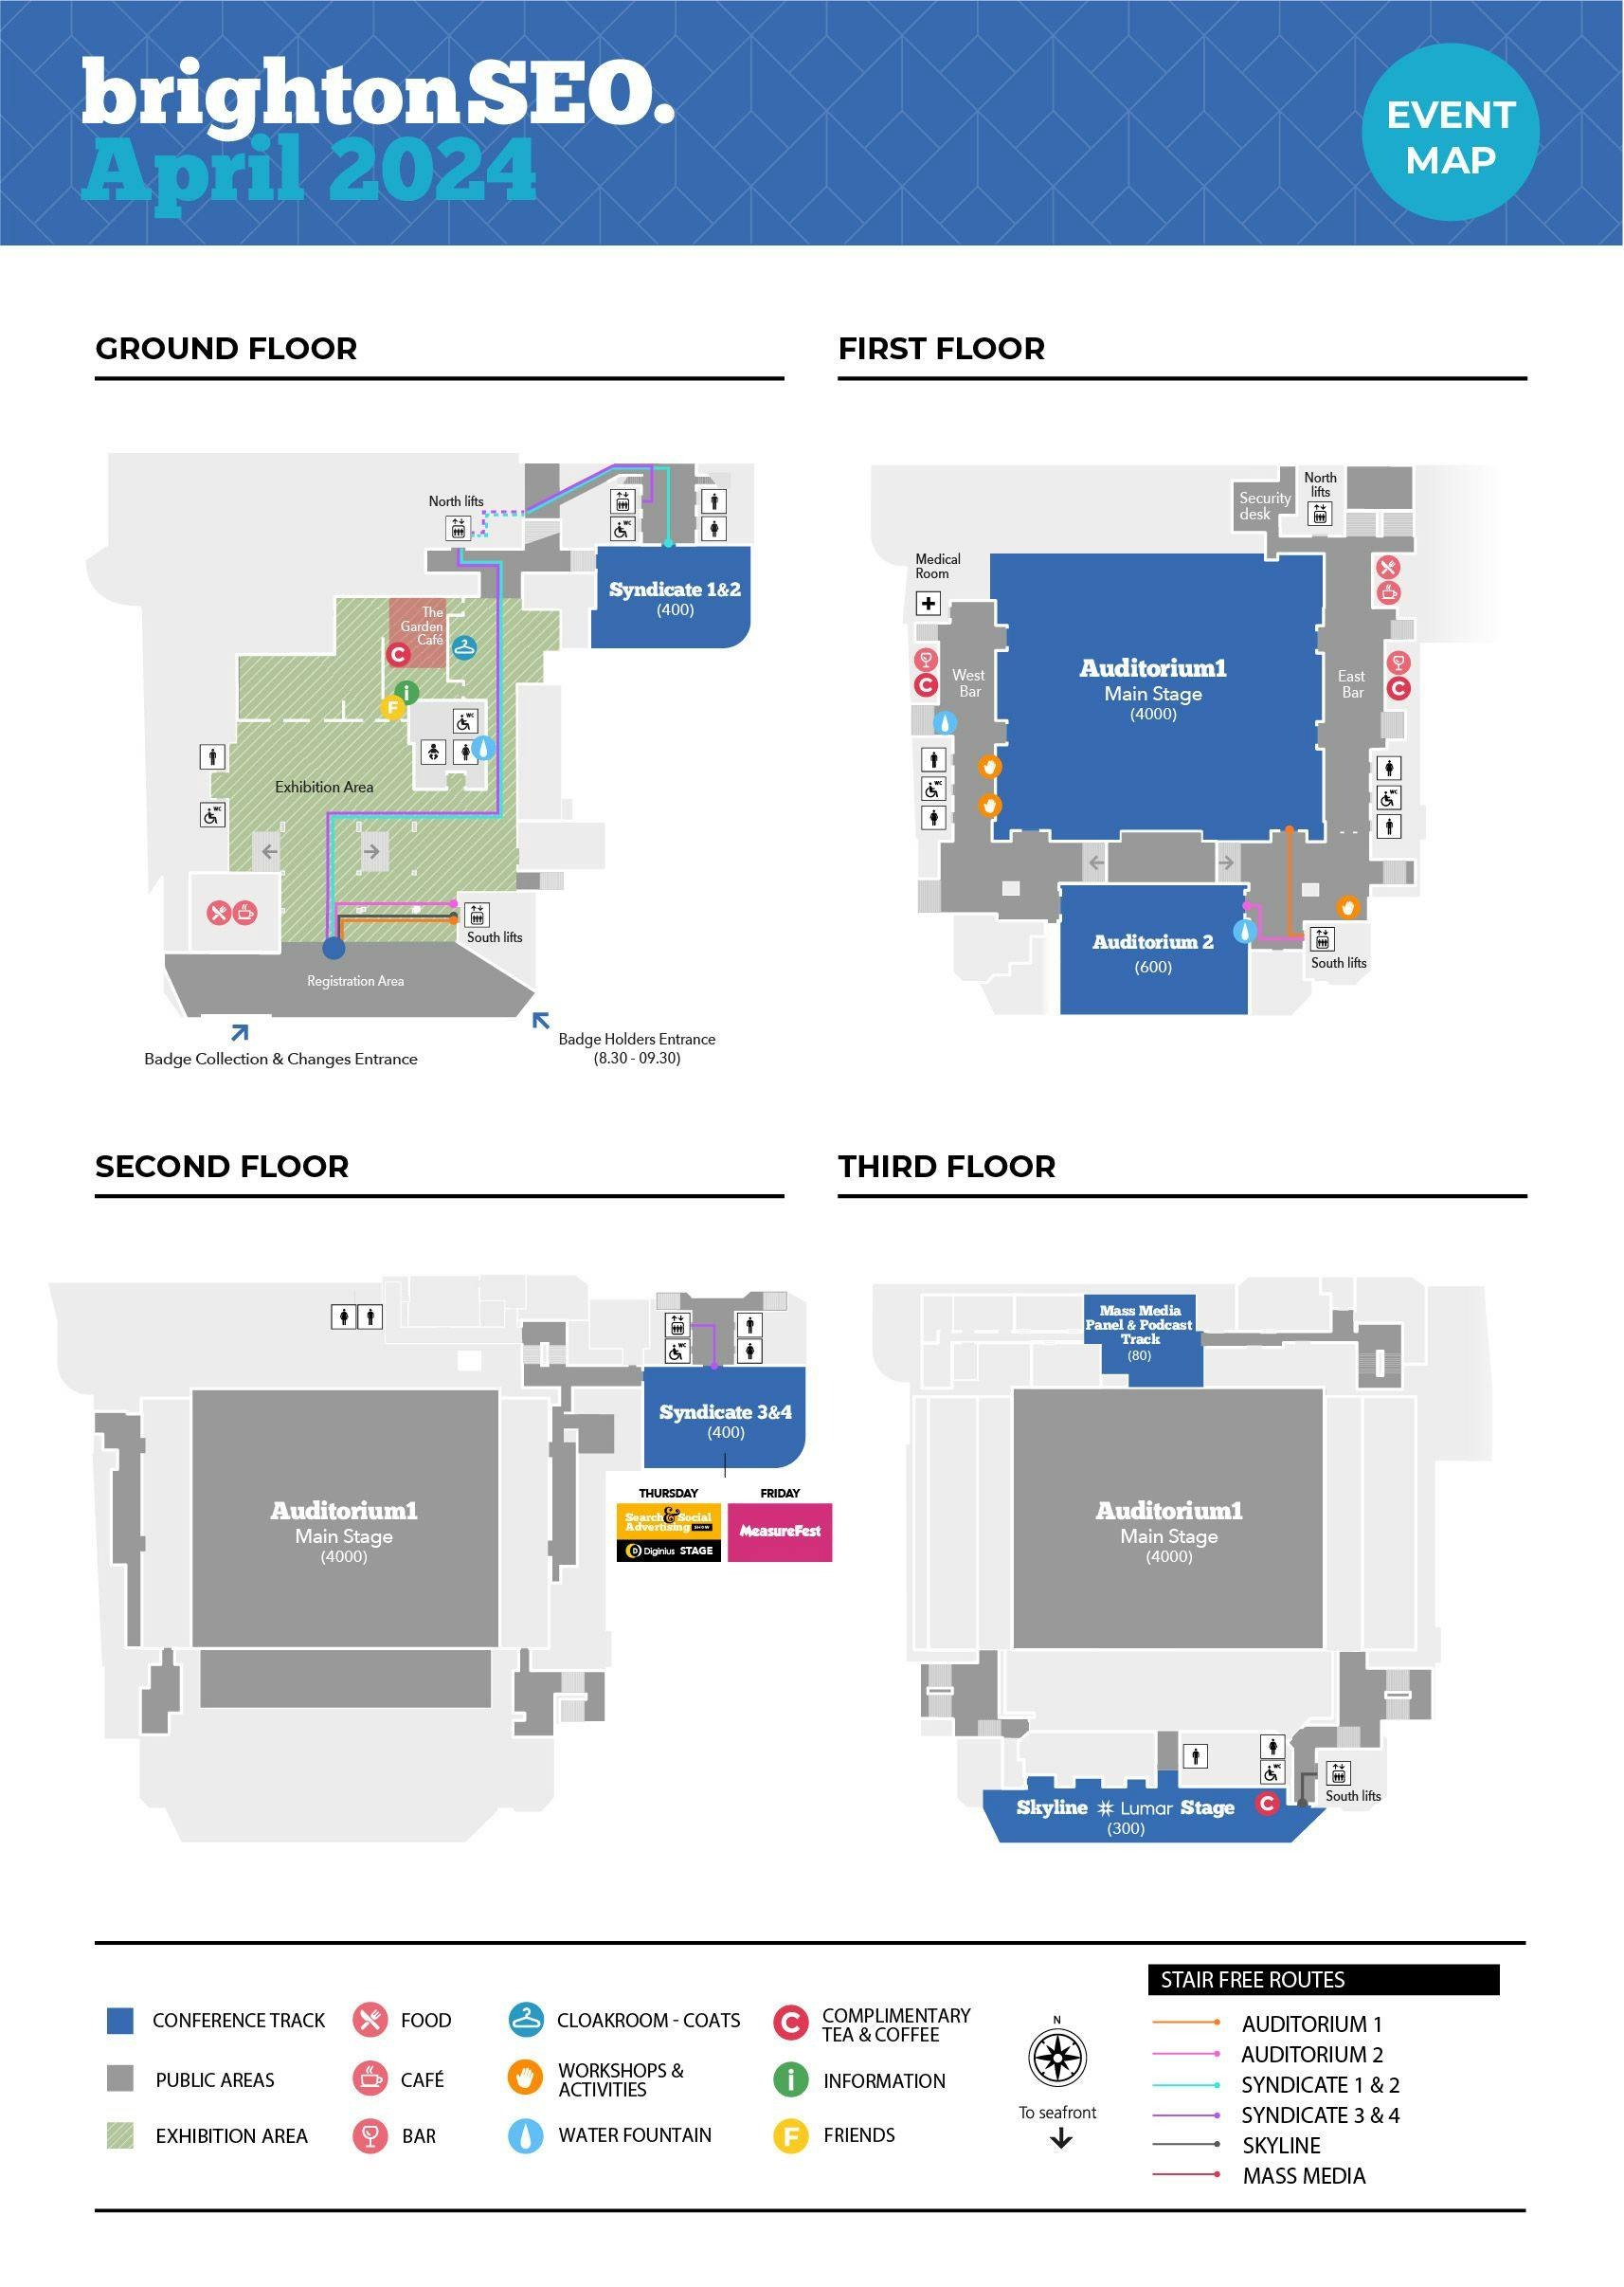 Stair-free access routes for brightonSEO at the Brighton Centre